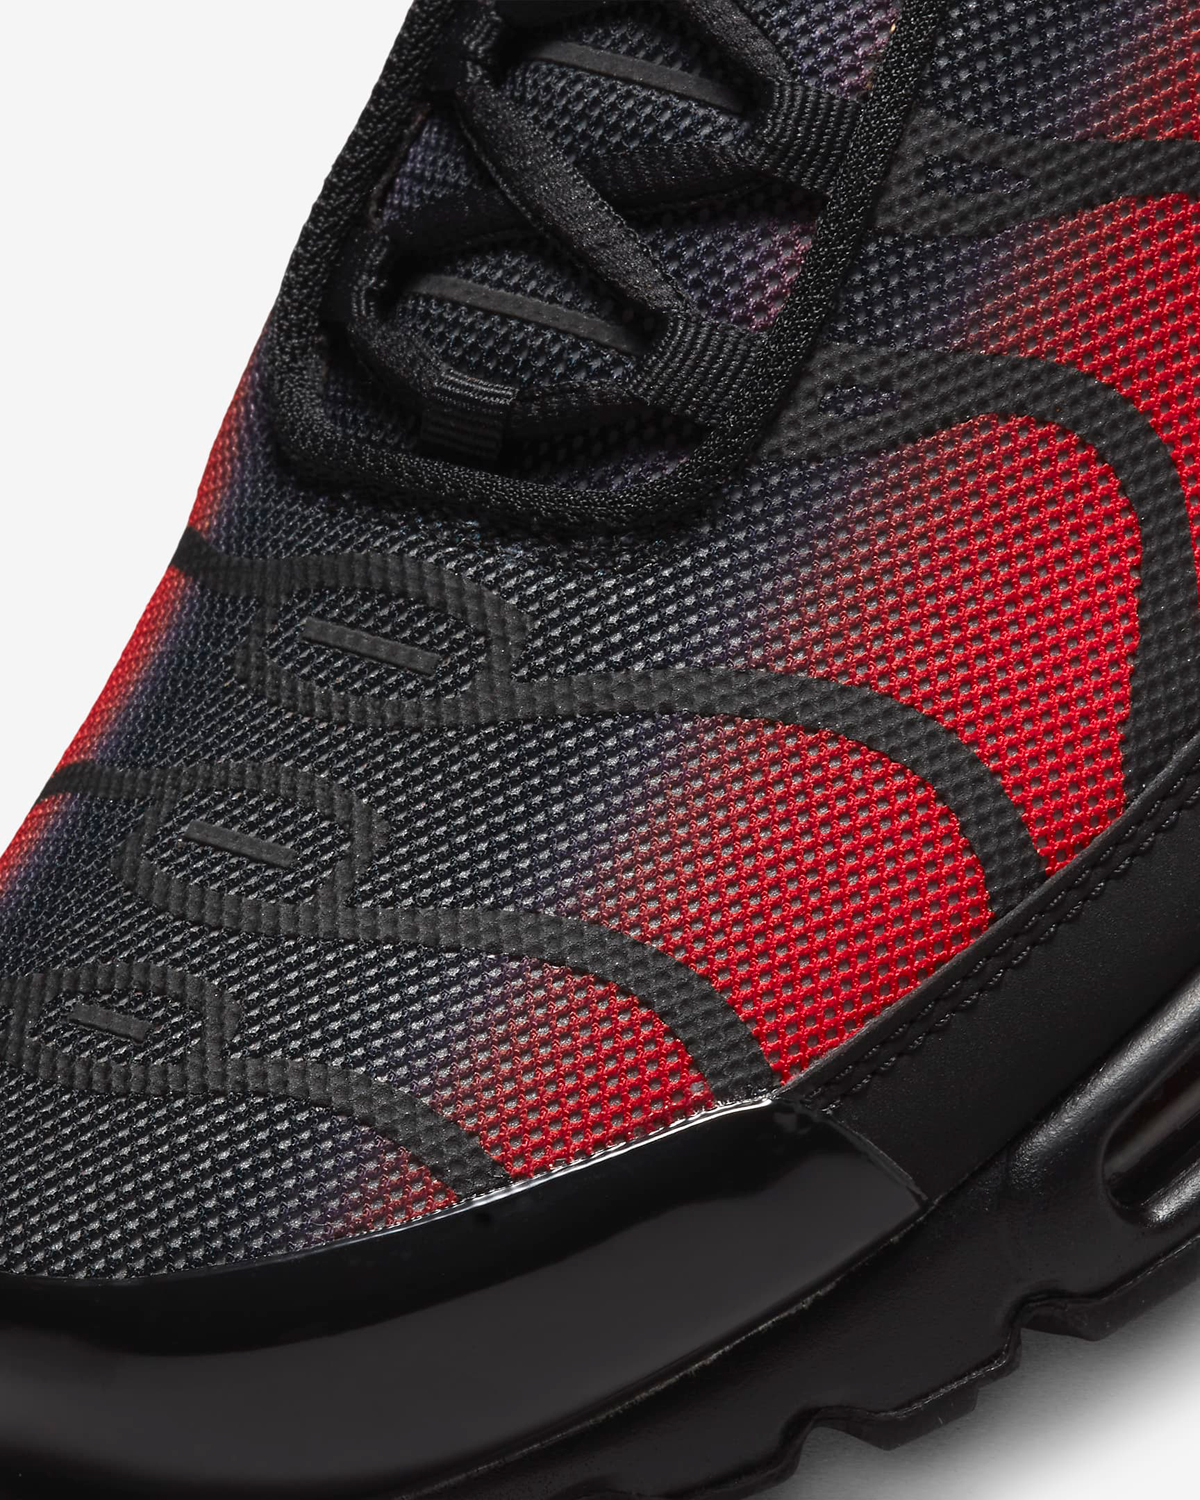 nike-air-max-plus-bred-university-red-black-release-date-7